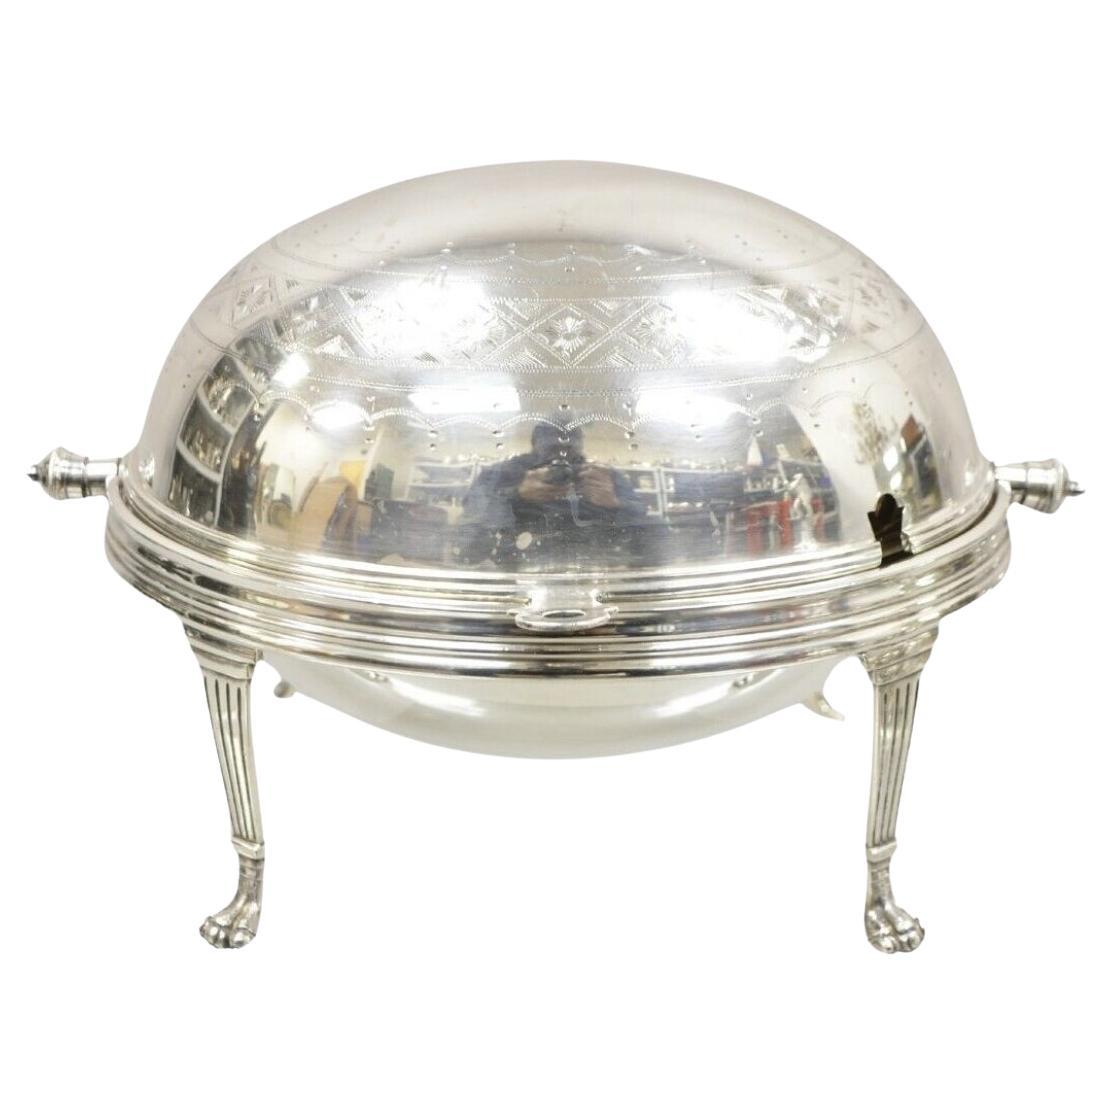 English Regency Victorian Silver Plated Revolving Dome Chafing Dish Warmer For Sale